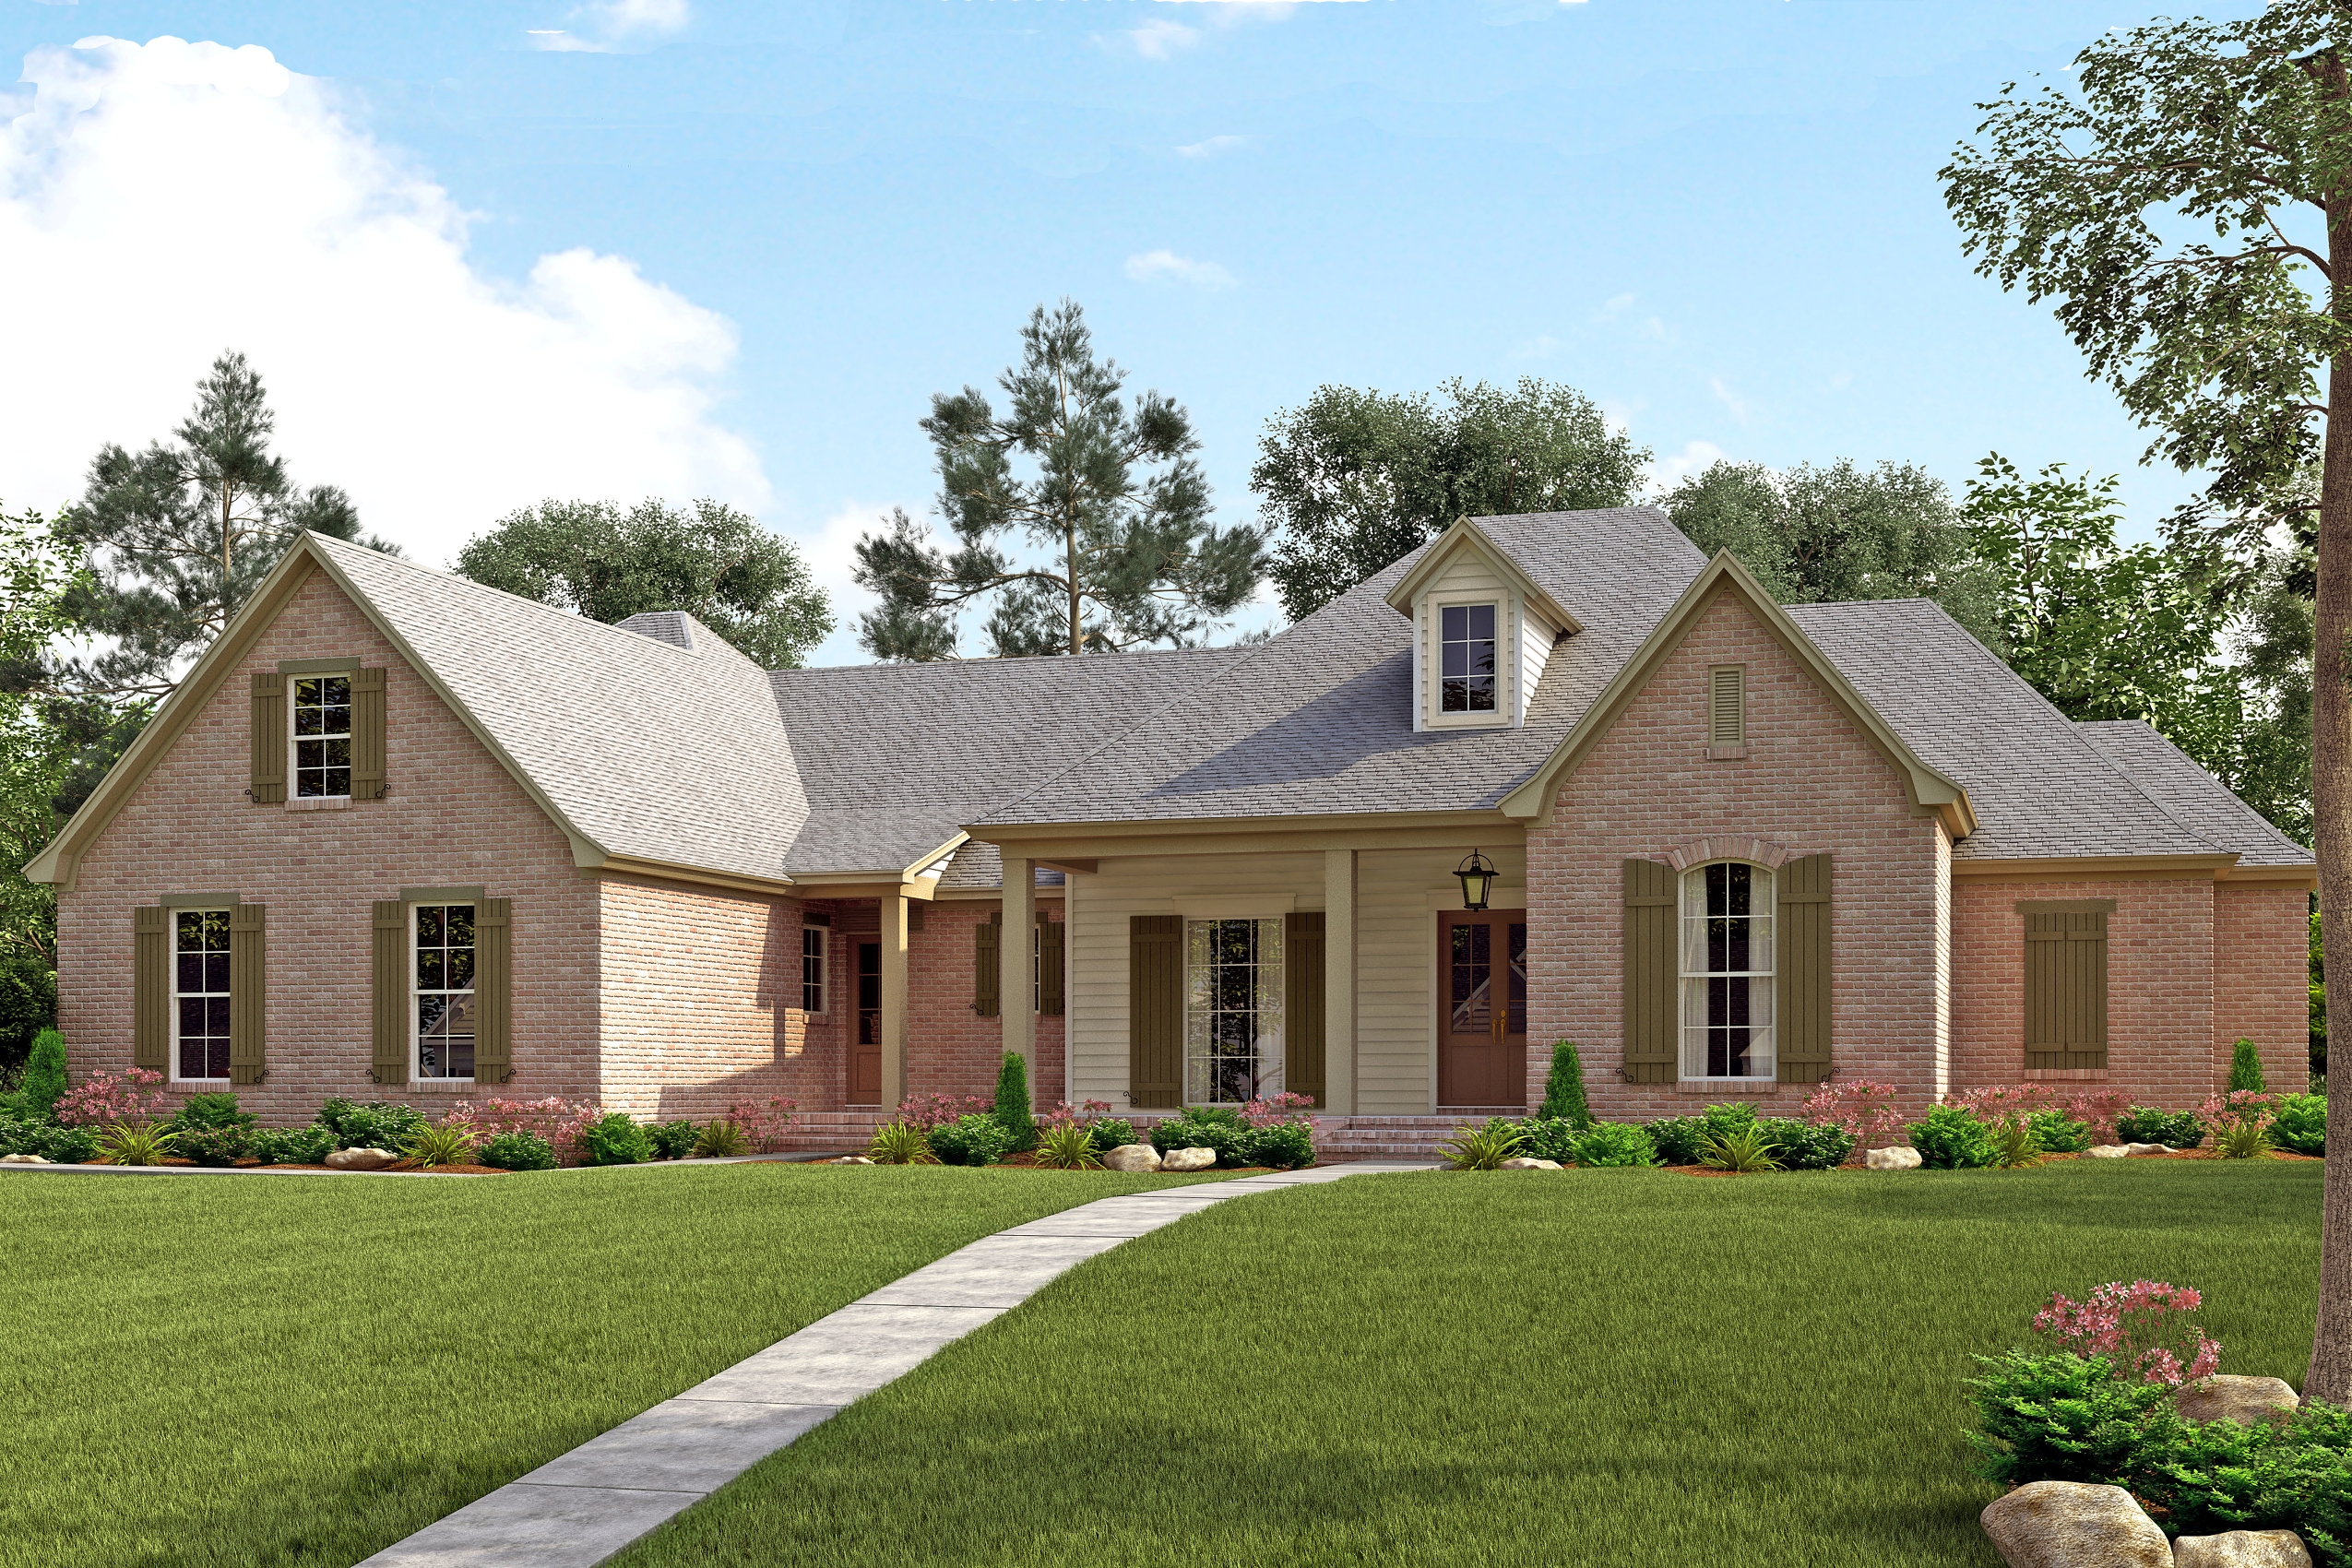 French House Plan 1421139 4 Bedrm, 3195 Sq Ft Home